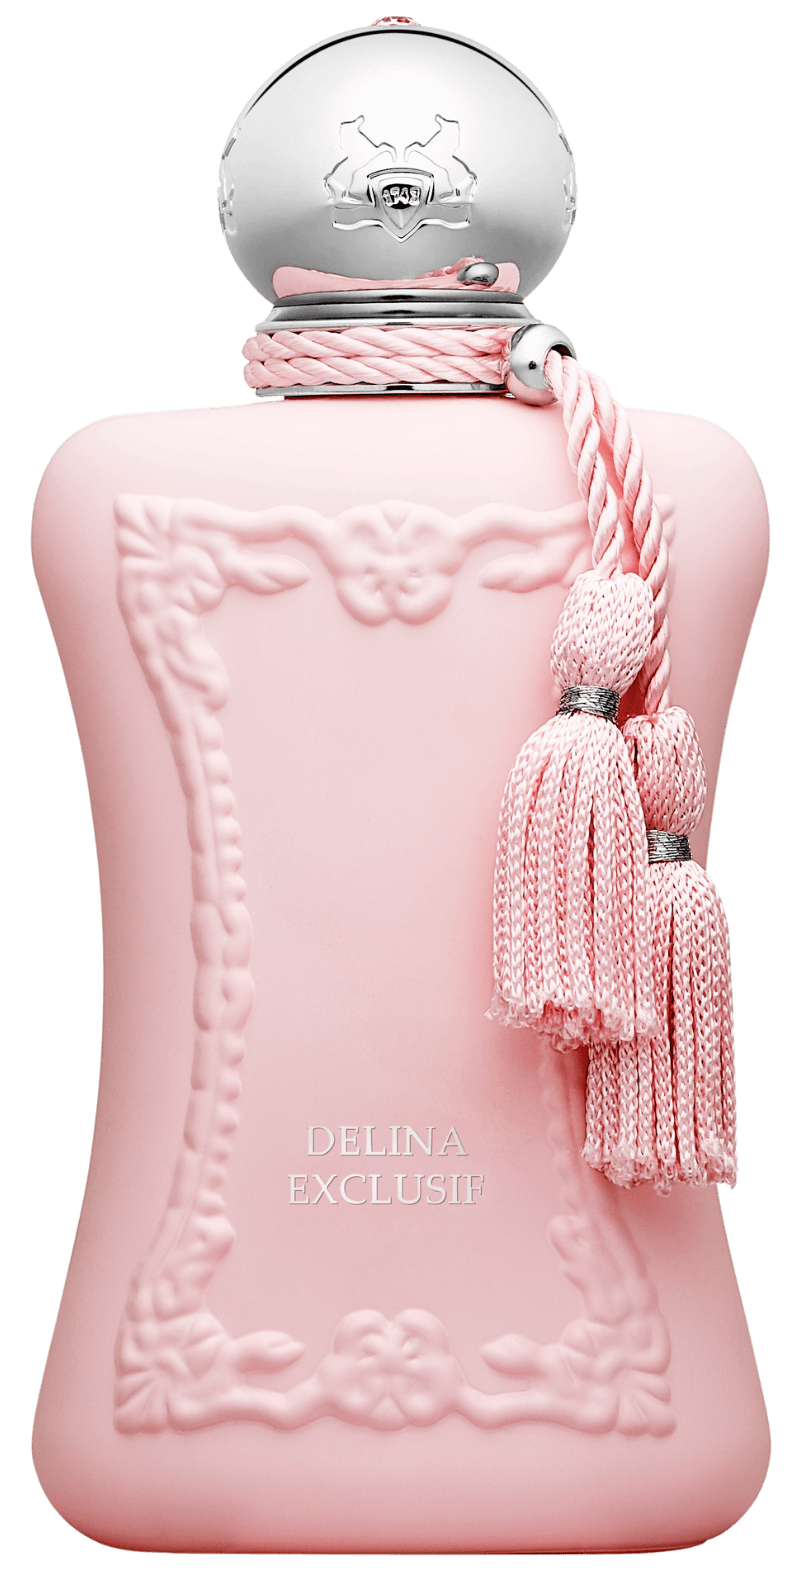 's Parfums de Marly Delina Exclusif - Bellini's Skin and Parfumerie 